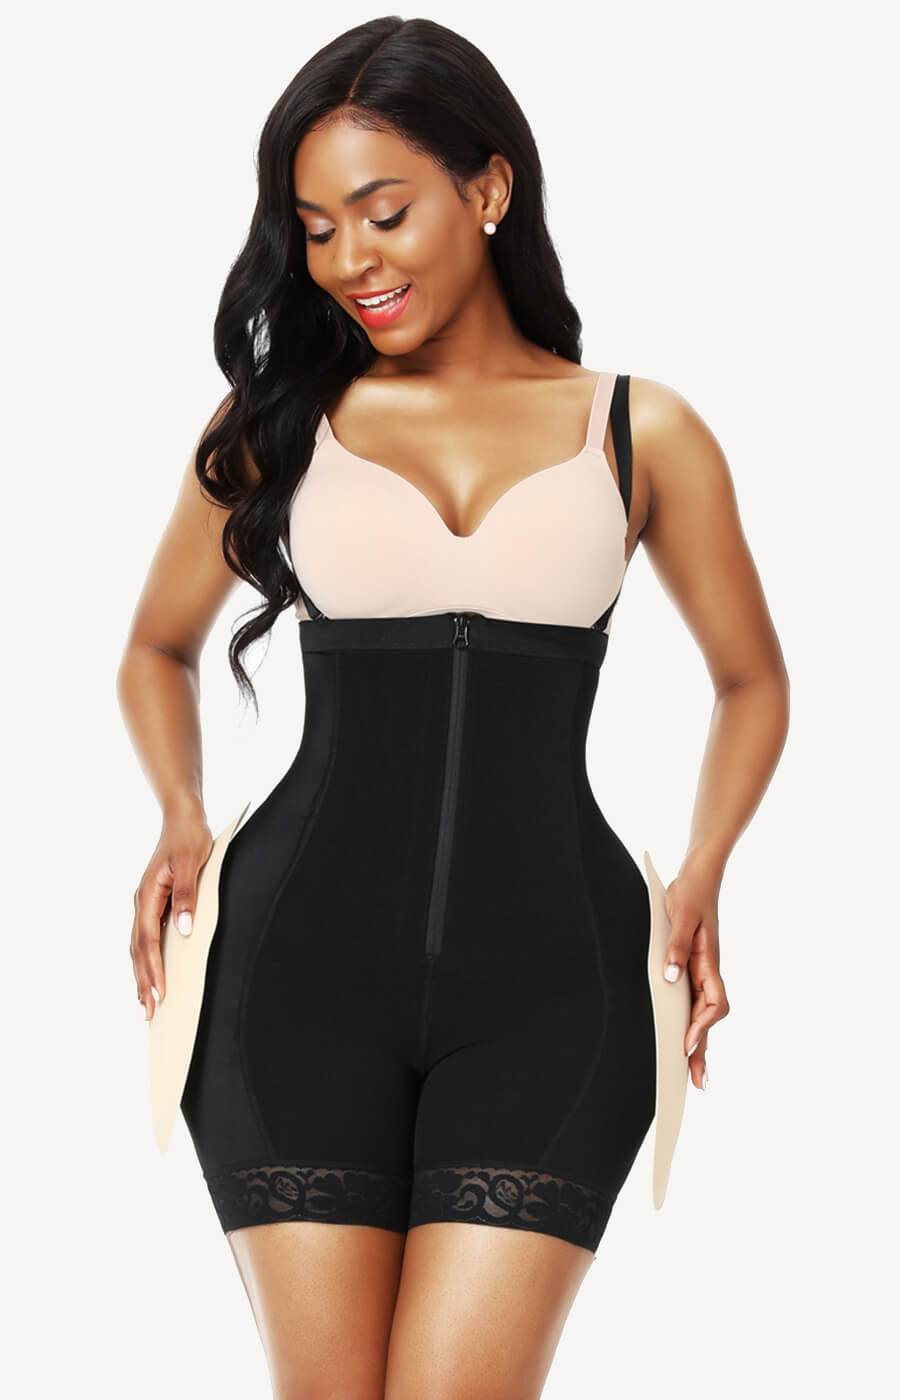 The Best Shapewear To Give You The Flattering Figure You Want